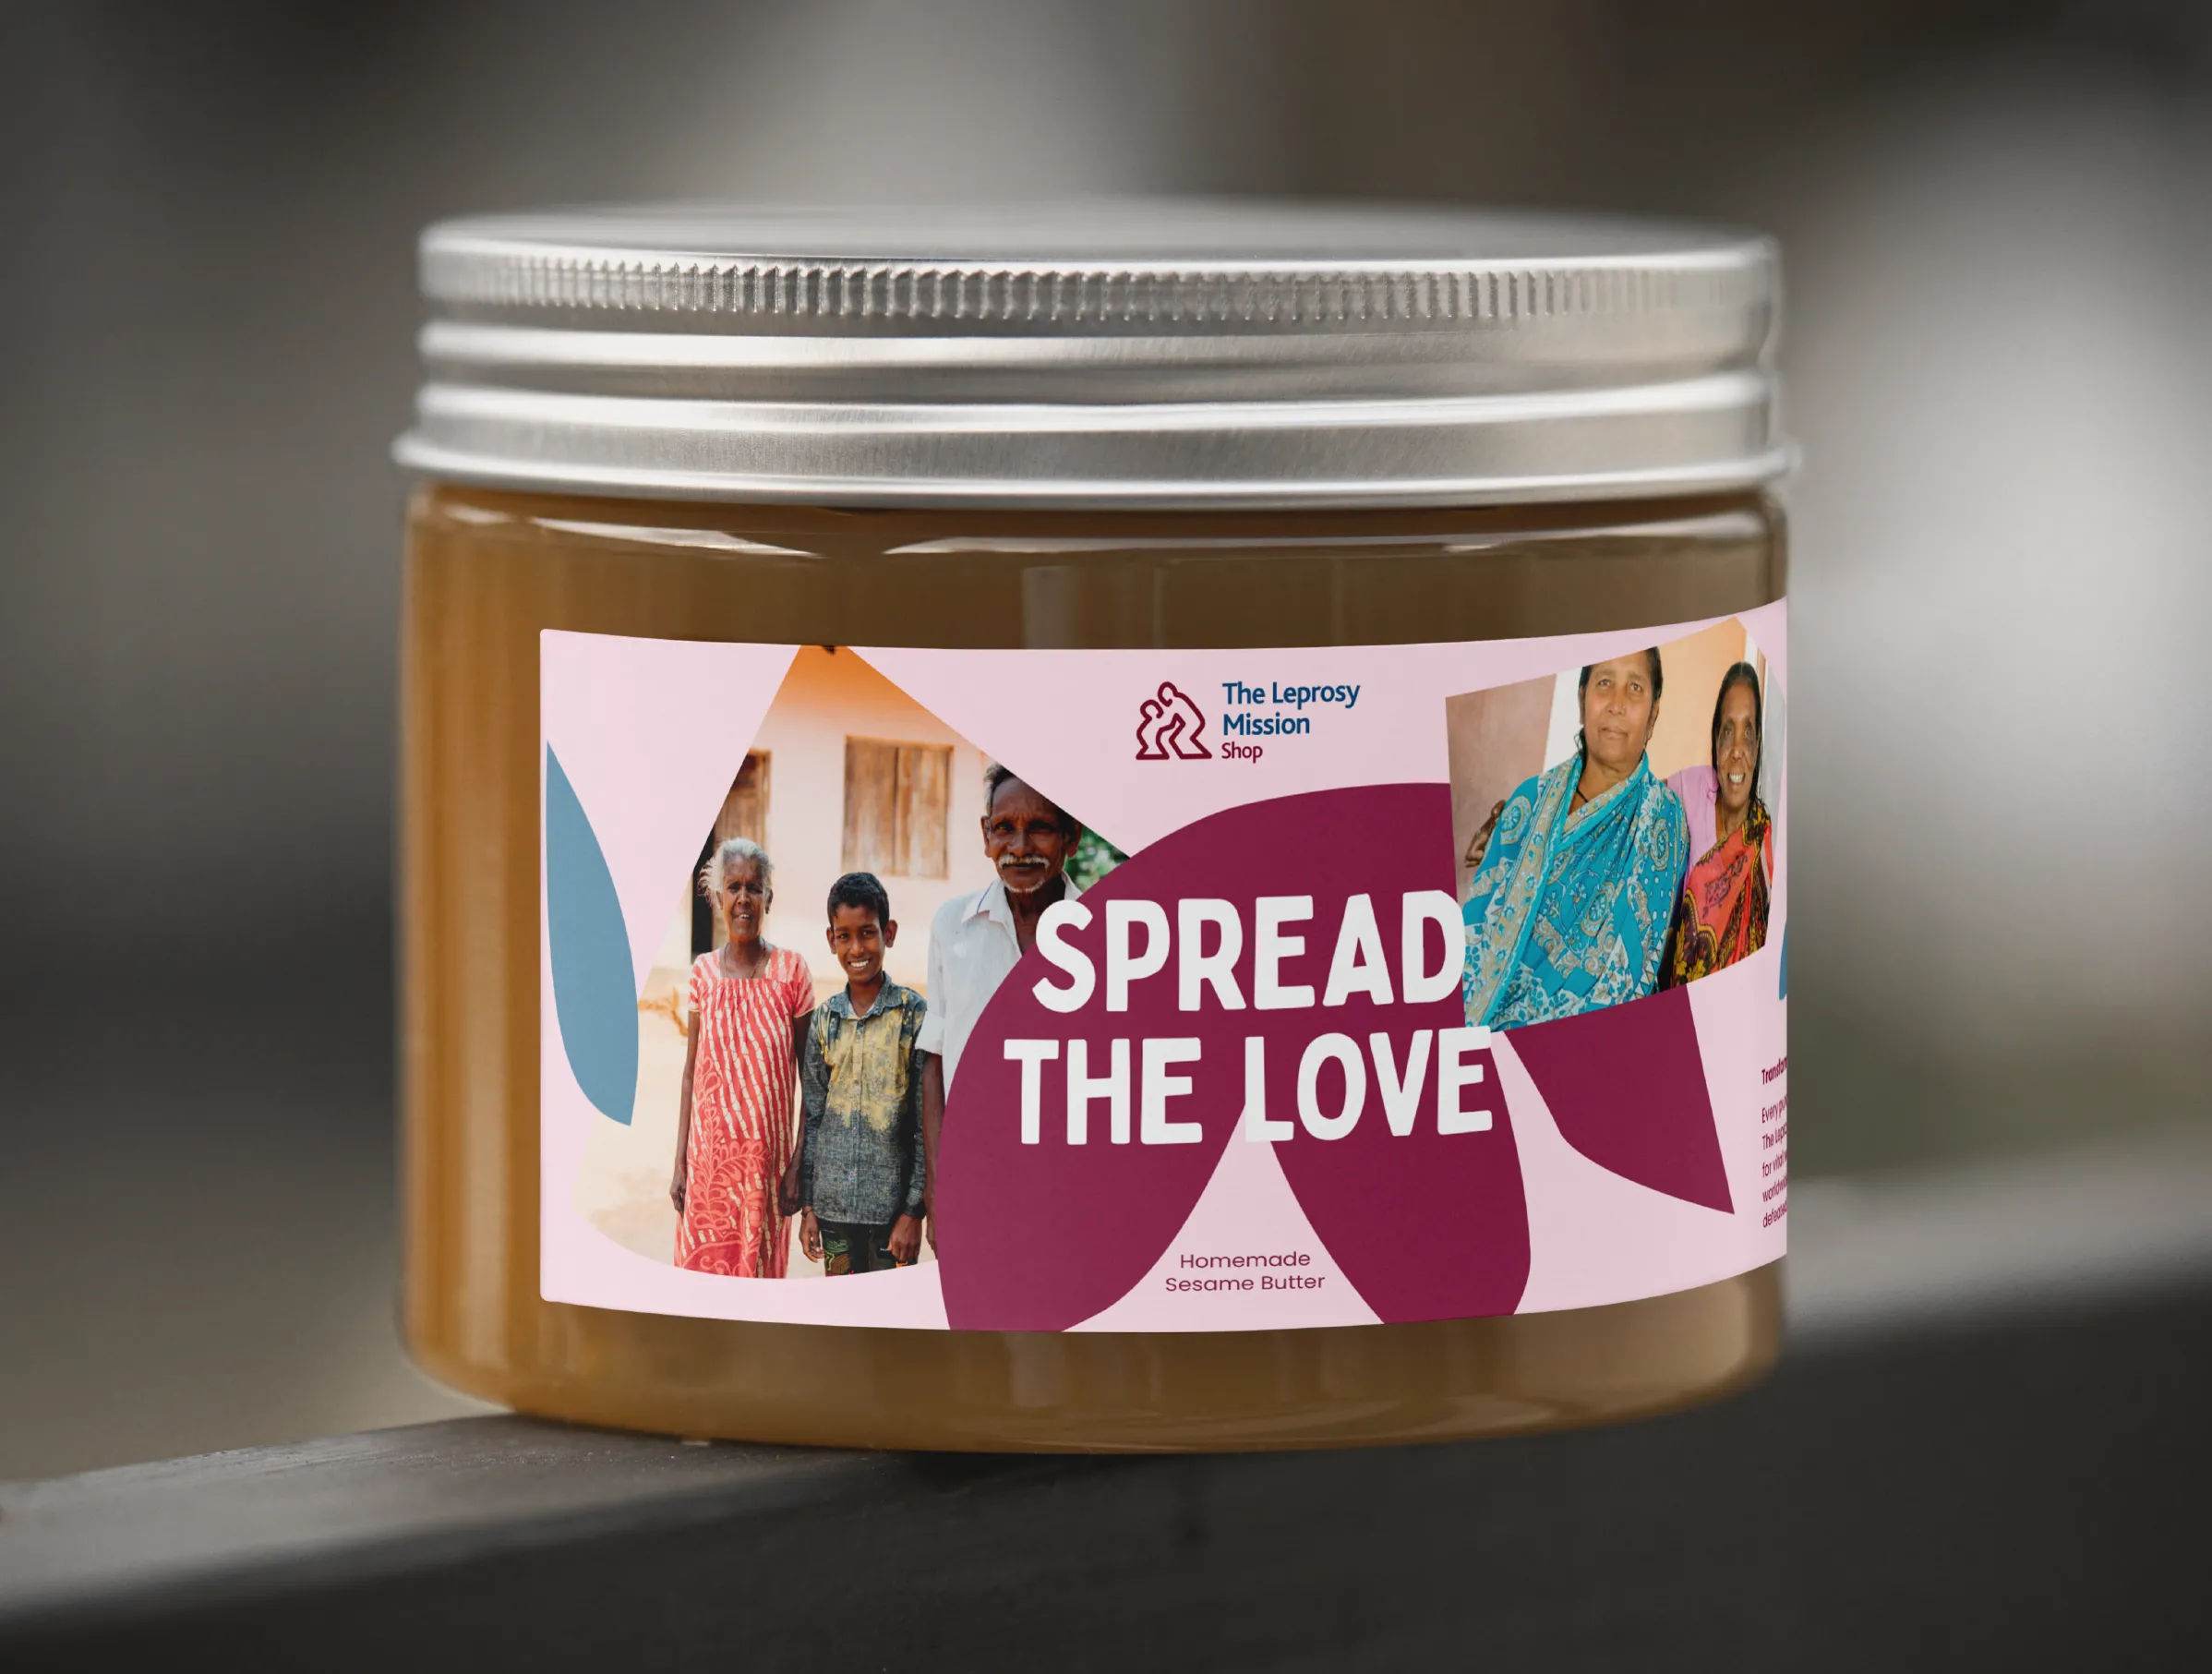 Mock of of a tub of sesame butter in Leprosy Mission Shop branding - copy says "Spread the love"